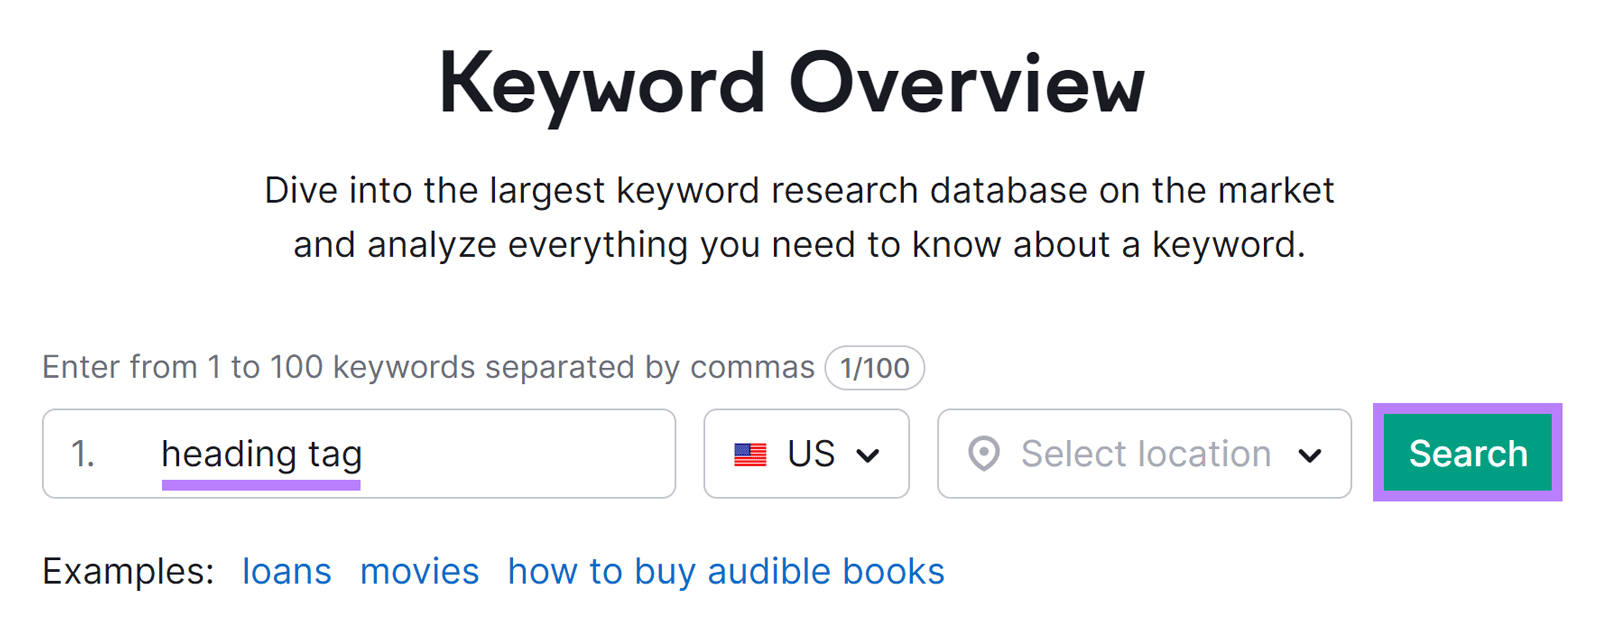 Semrush Keyword Overview tool start with 'heading tag' in input field and Search button highlighted.